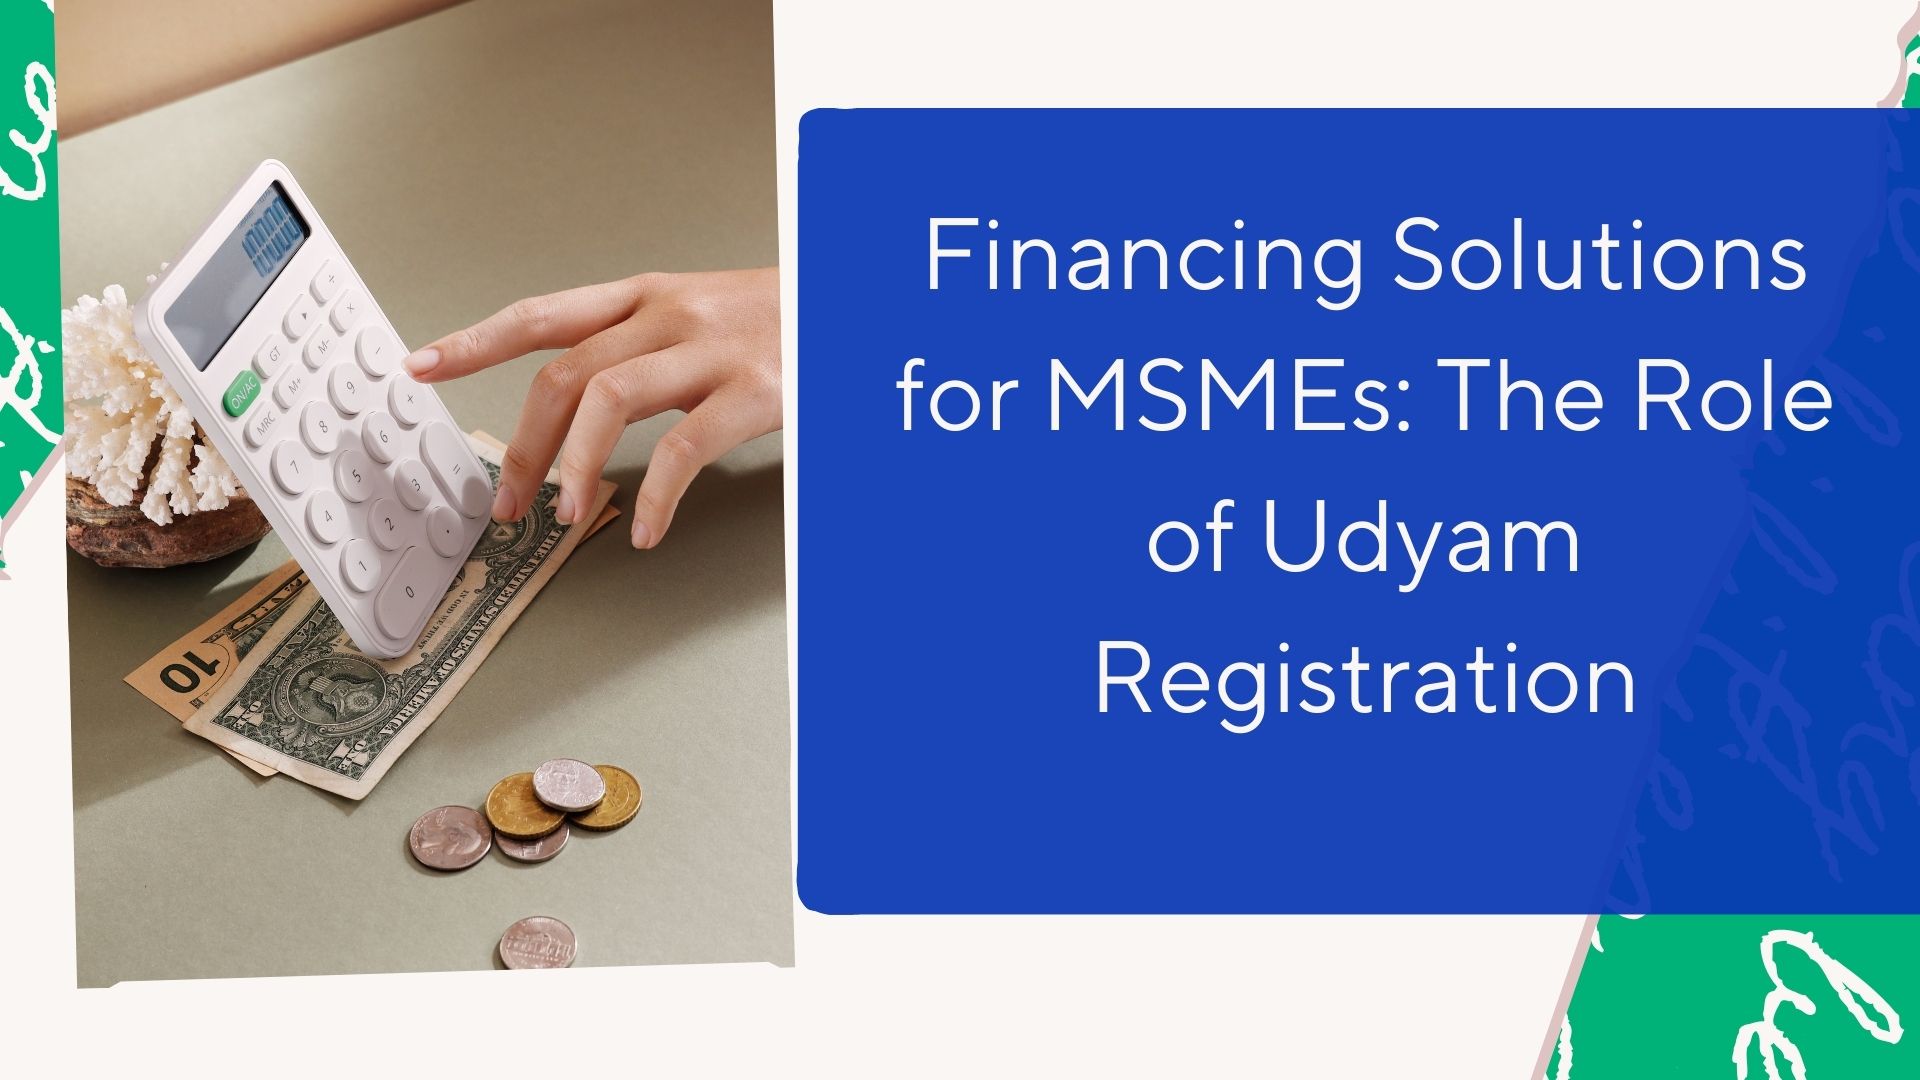 Financing Solutions for MSMEs The Role of Udyam Registration